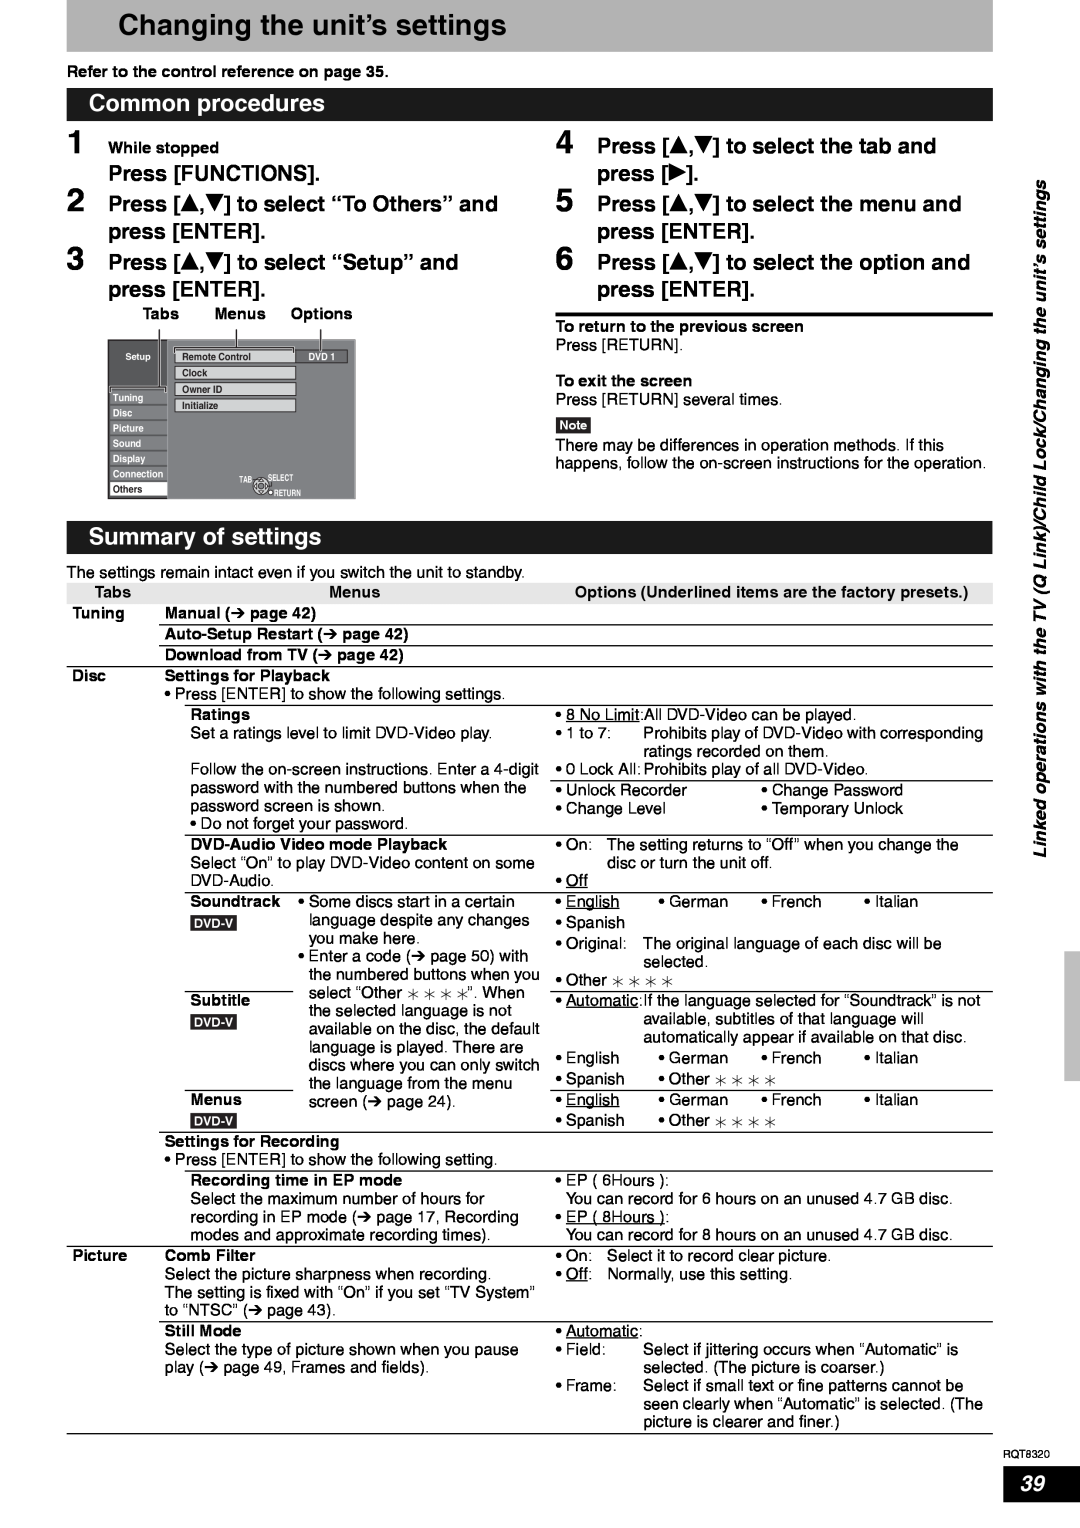 Panasonic DMR-ES15EB manual Changing the unit’s settings, Summary of settings, Press e,r to select the tab and, press q 